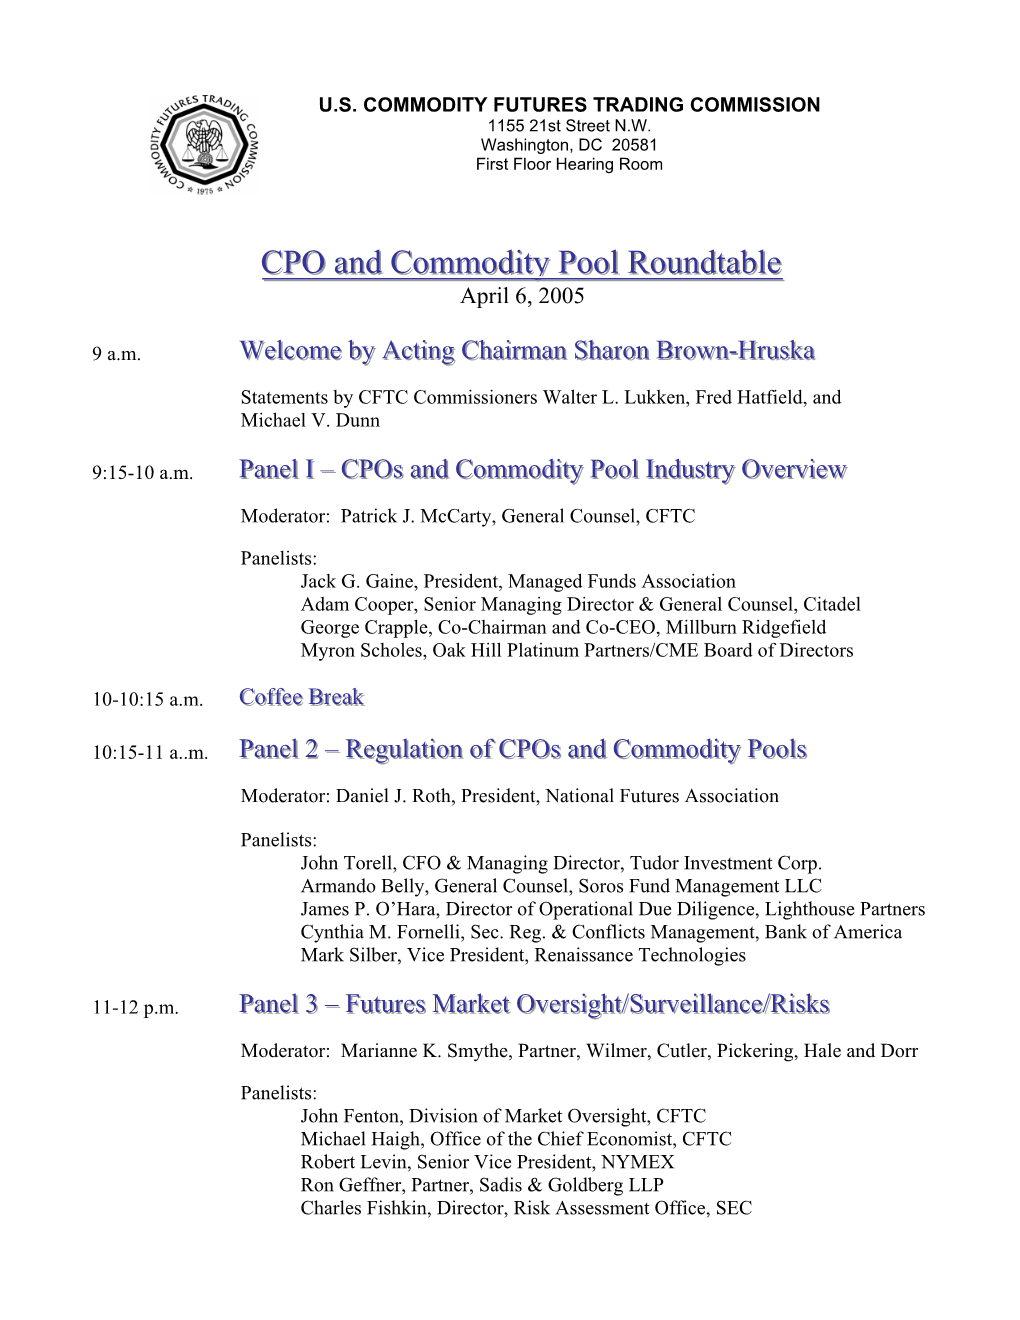 CPO and Commodity Pool Roundtable